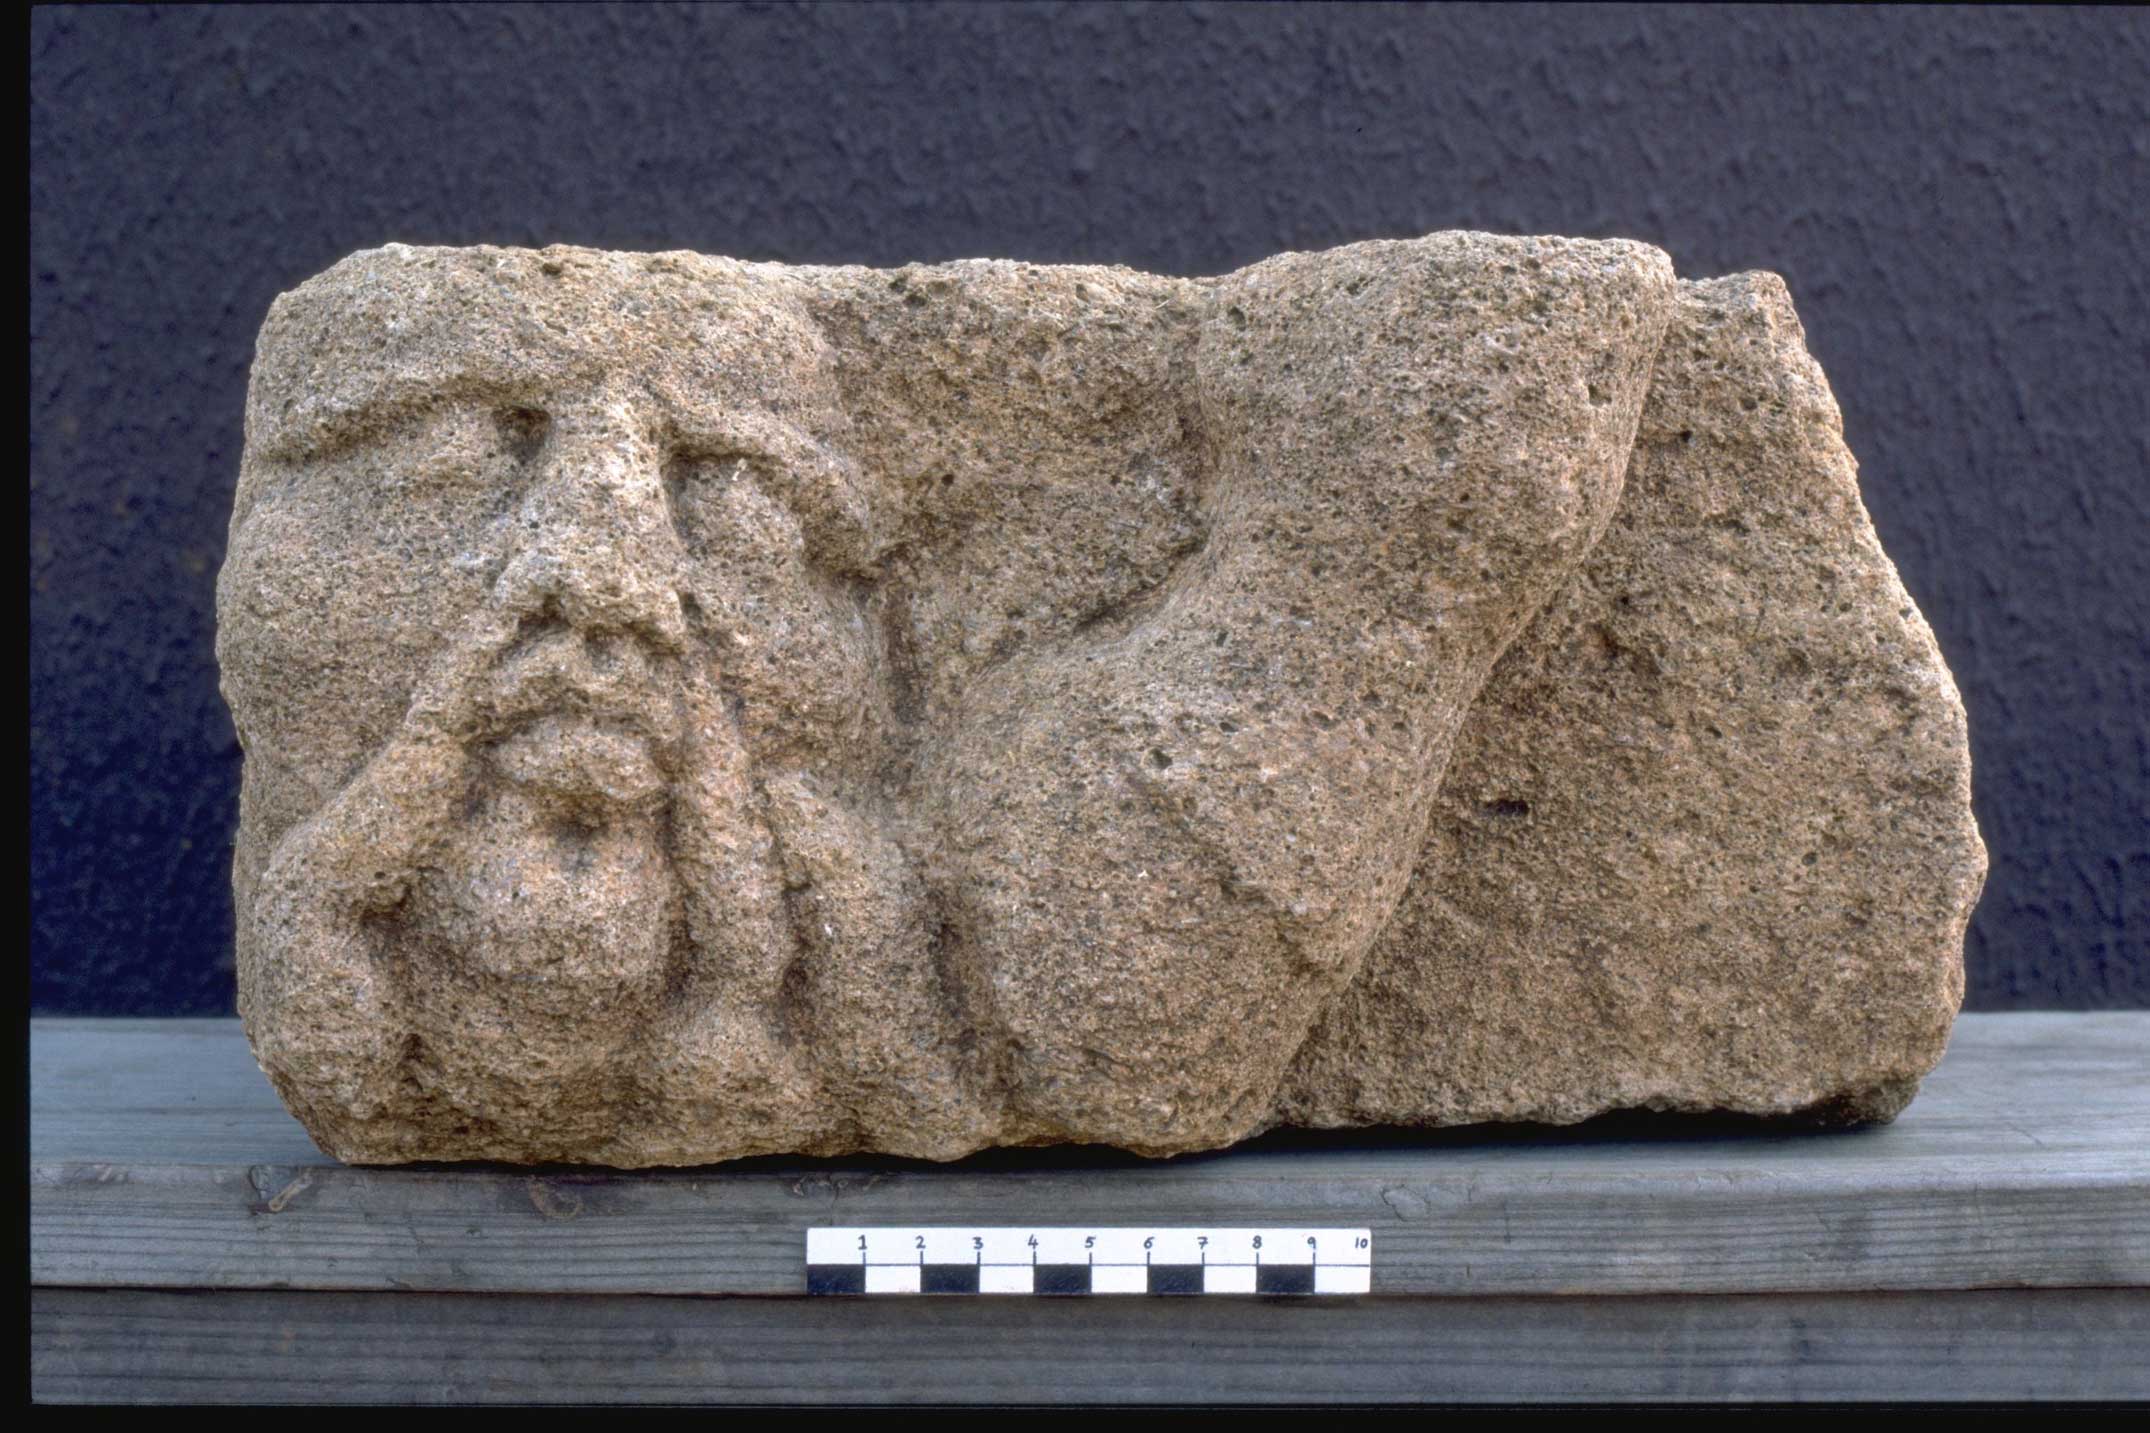 A fragment of stone sculpture depicting the head of a man with a long moustache being trampled by a horses hoof.